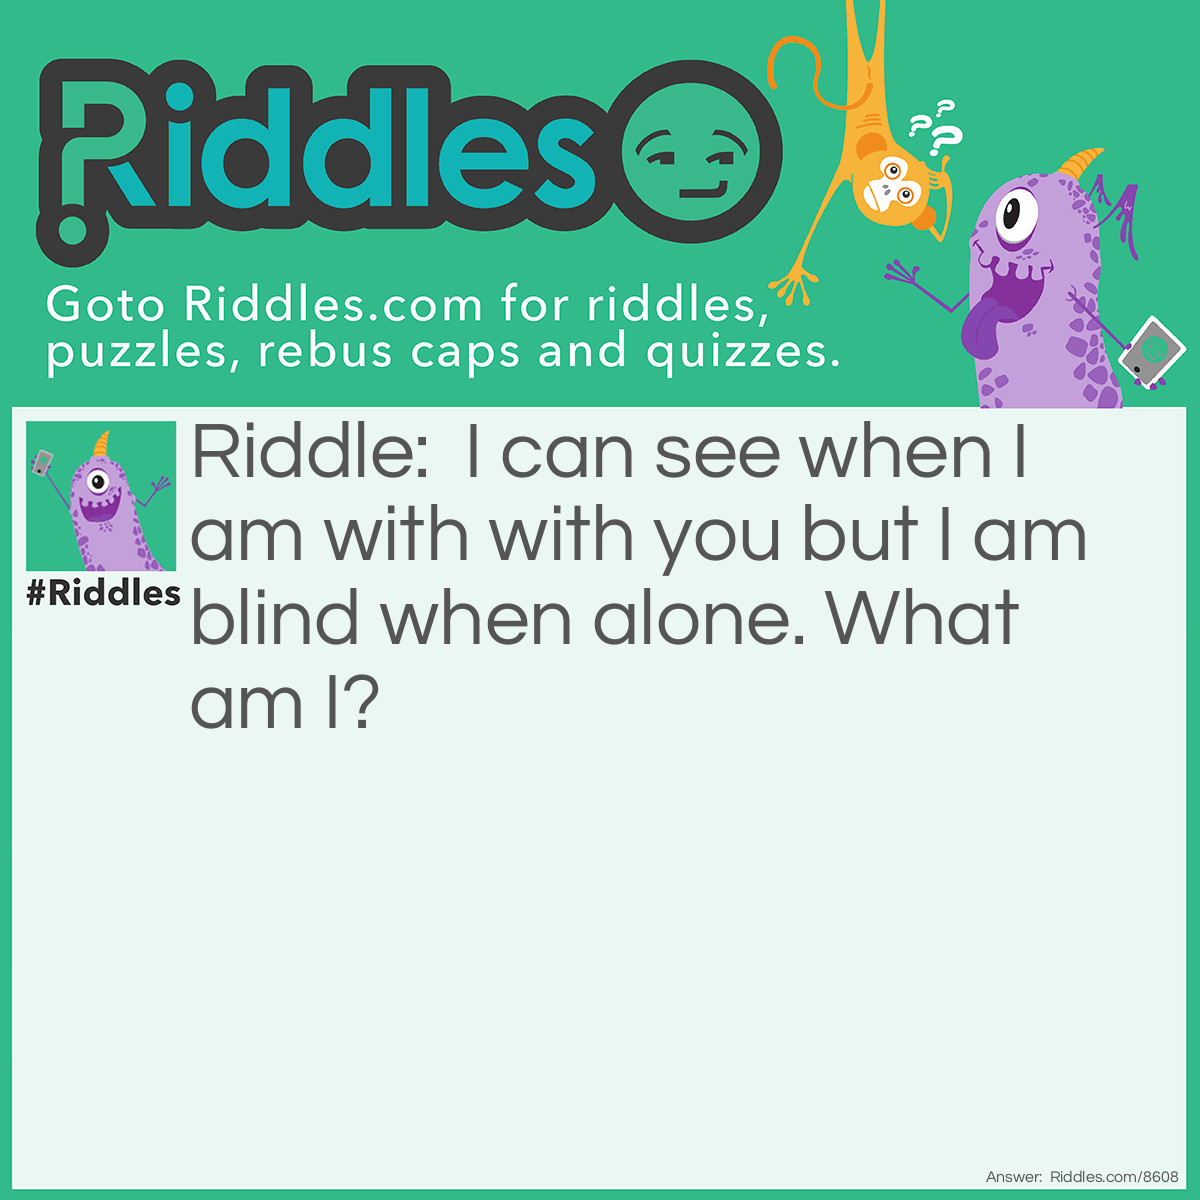 Riddle: I can see when I am with with you but I am blind when alone. What am I? Answer: Glasses.